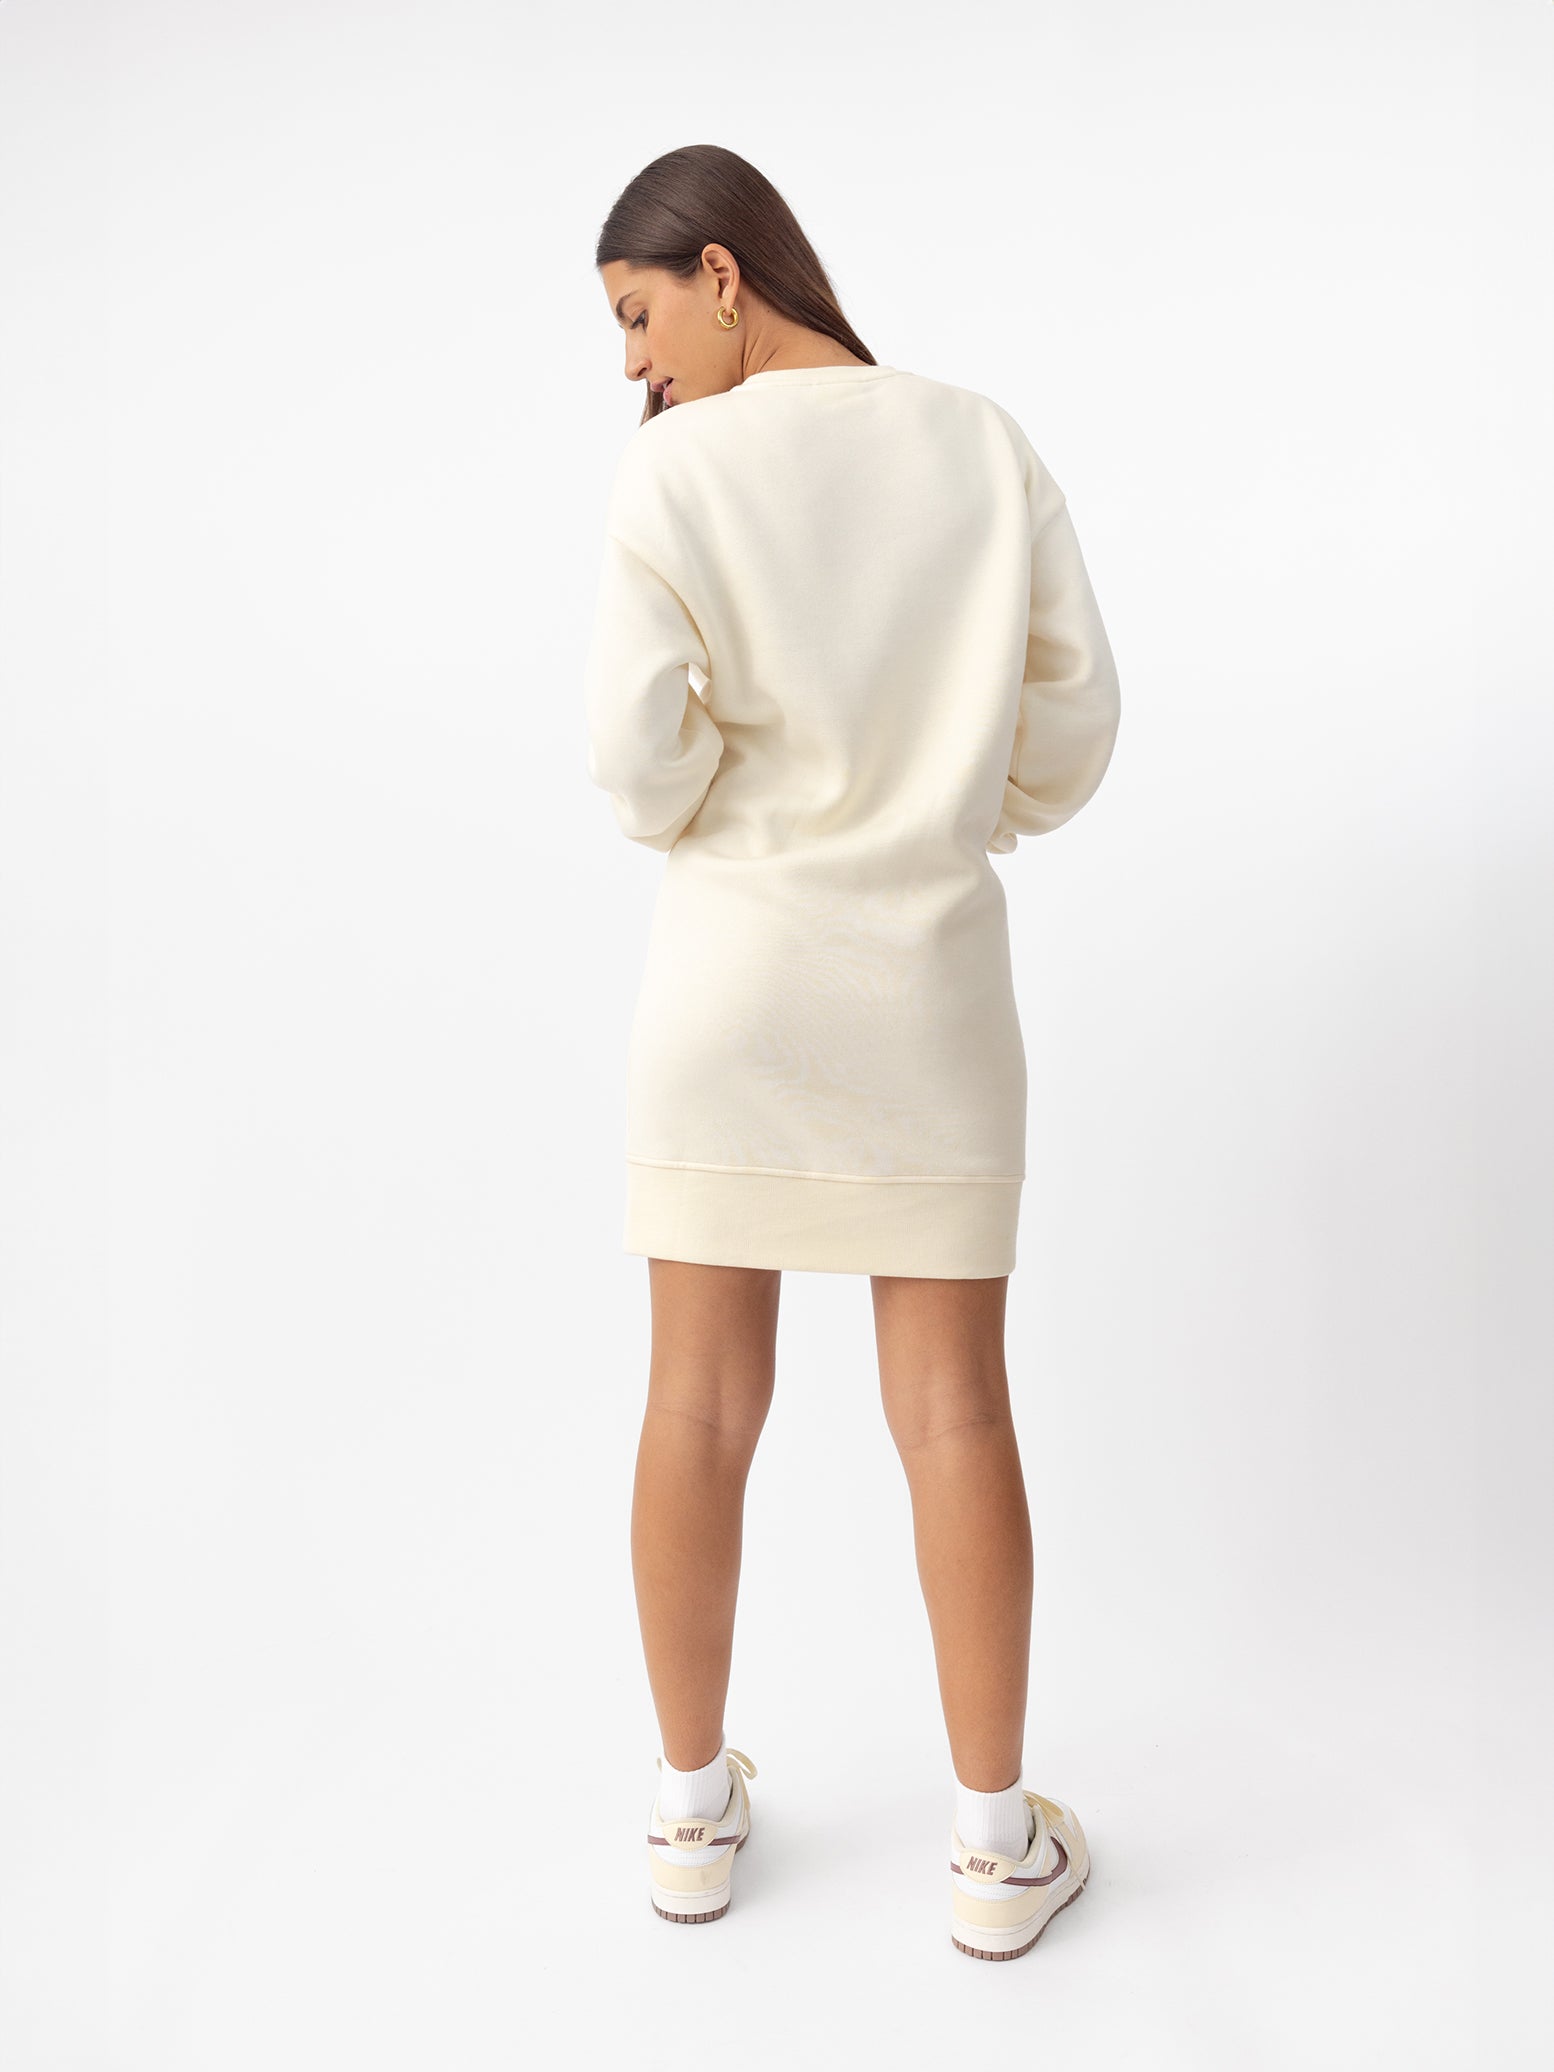 Woman wearing Alabaster CityScape Crewneck Dress with white background |Color: Alabaster